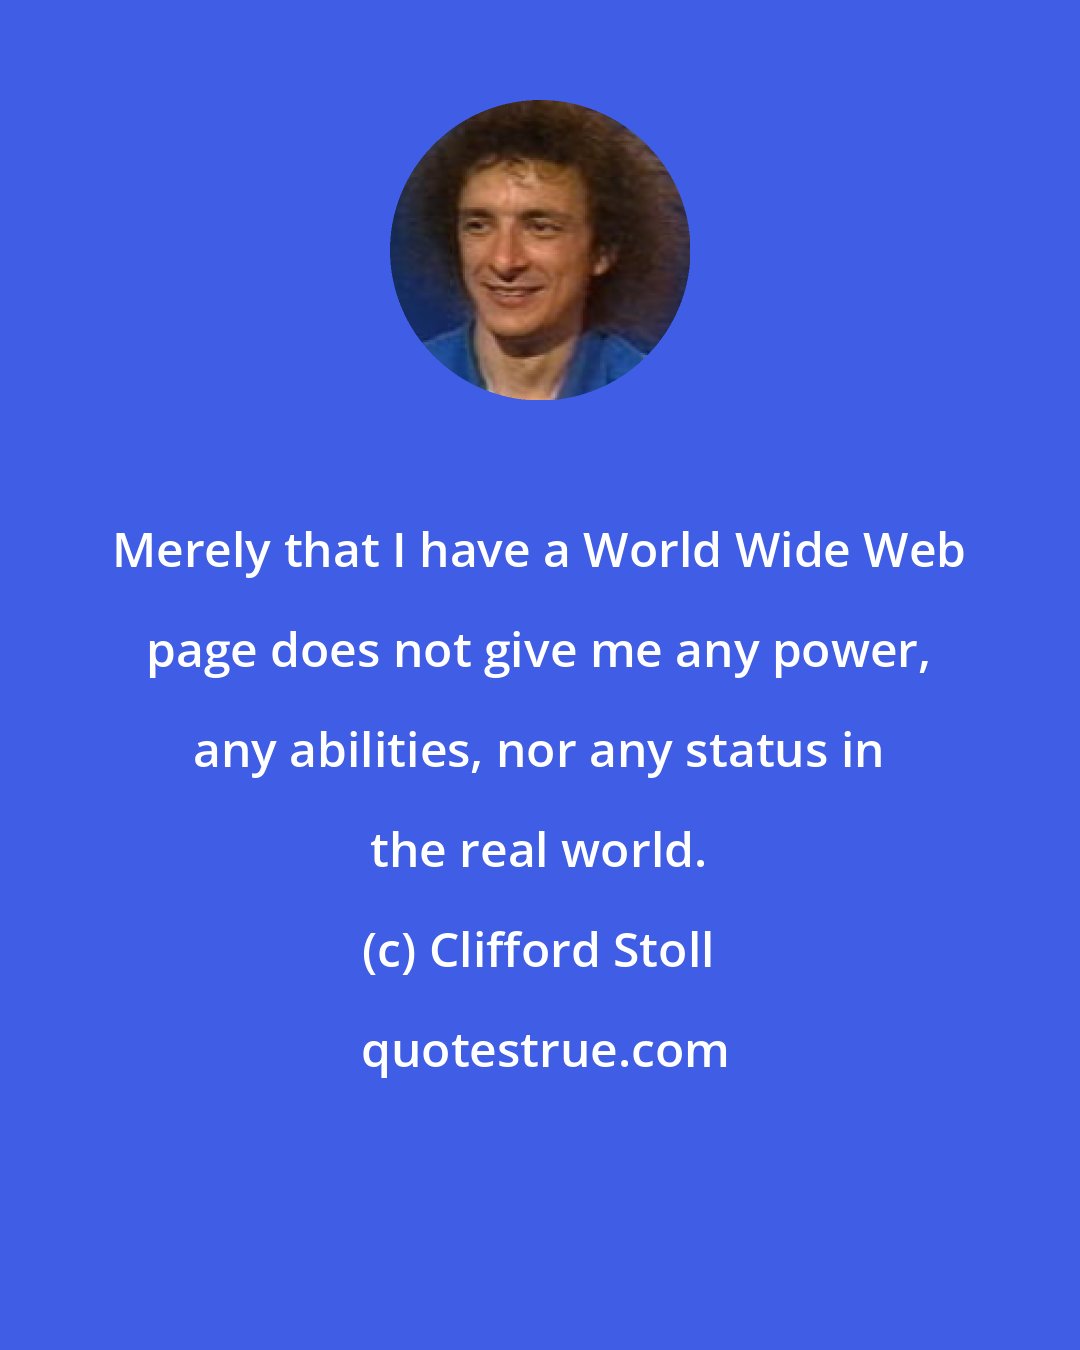 Clifford Stoll: Merely that I have a World Wide Web page does not give me any power, any abilities, nor any status in the real world.